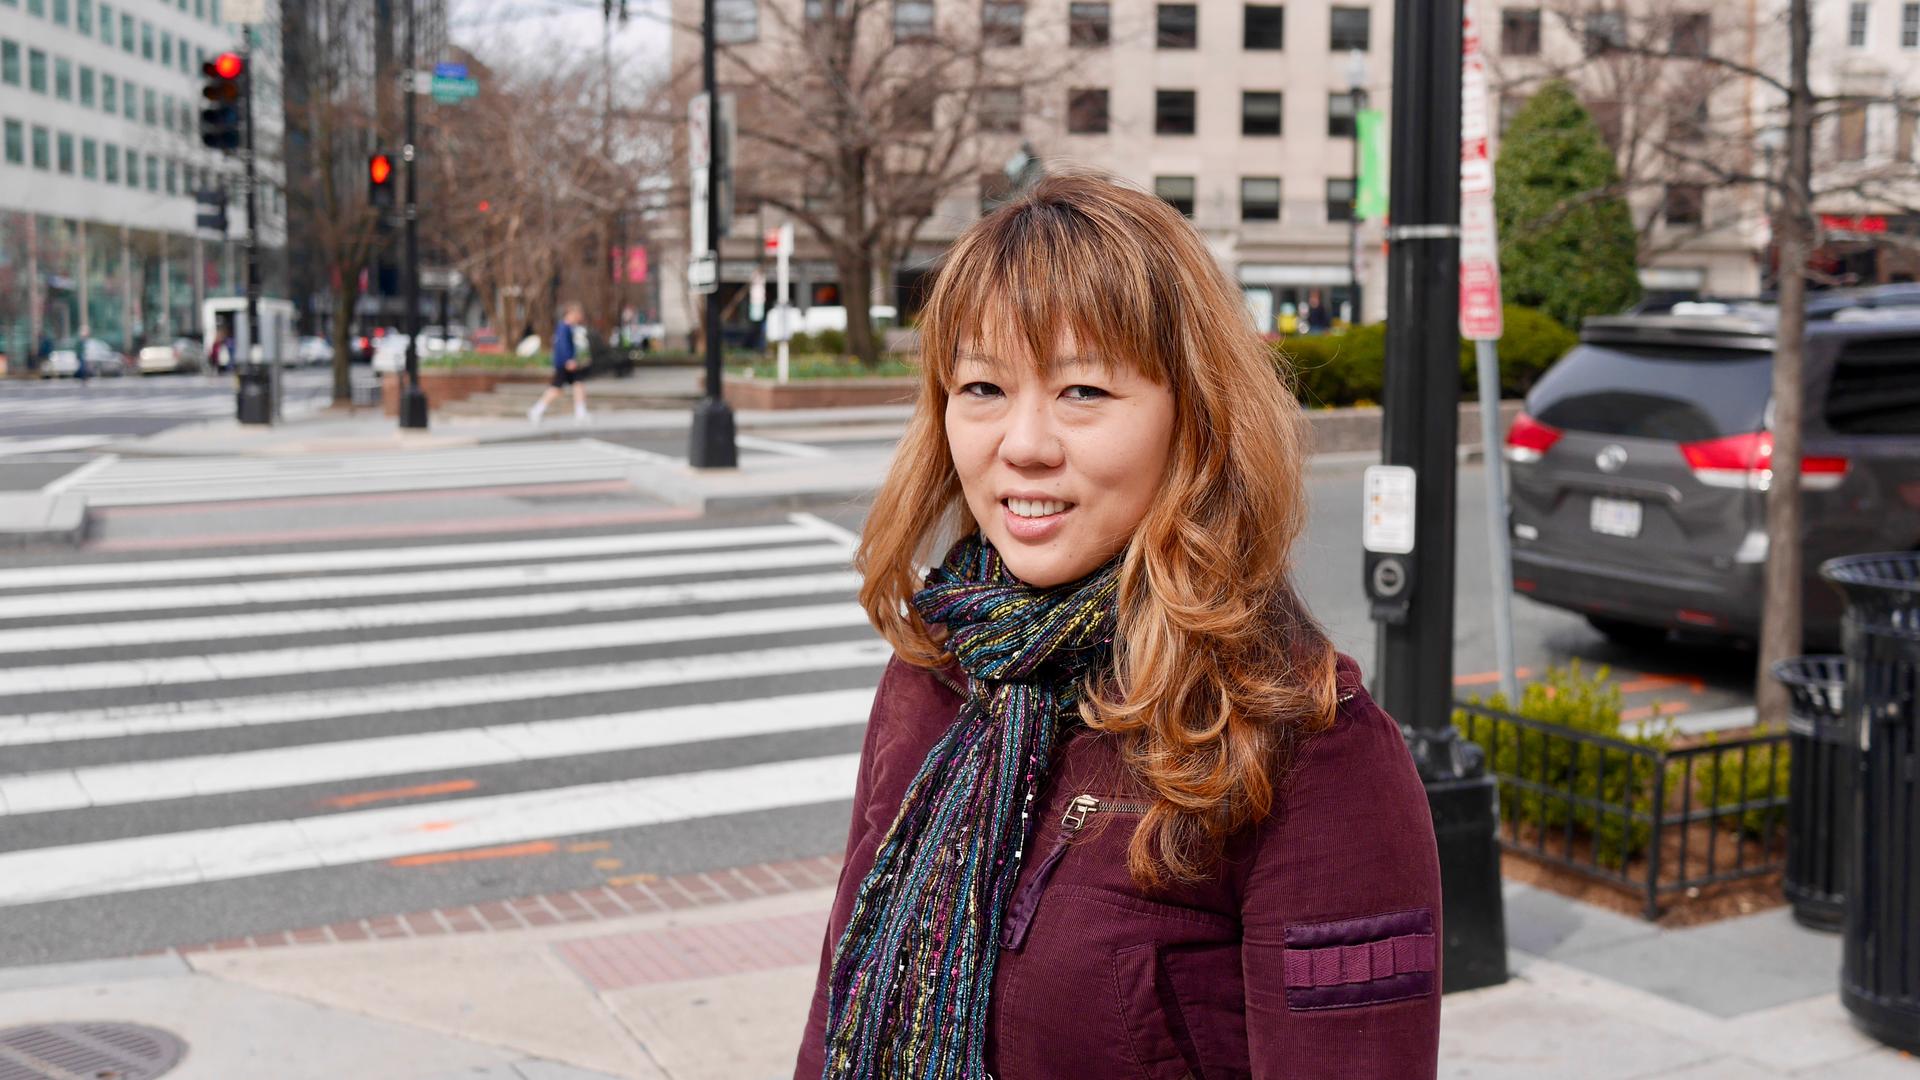 Jenny Town is managing editor at 38 North, which uses commercial satellite imagery to interpret what's happening at North Korean missile and nuclear facilities.